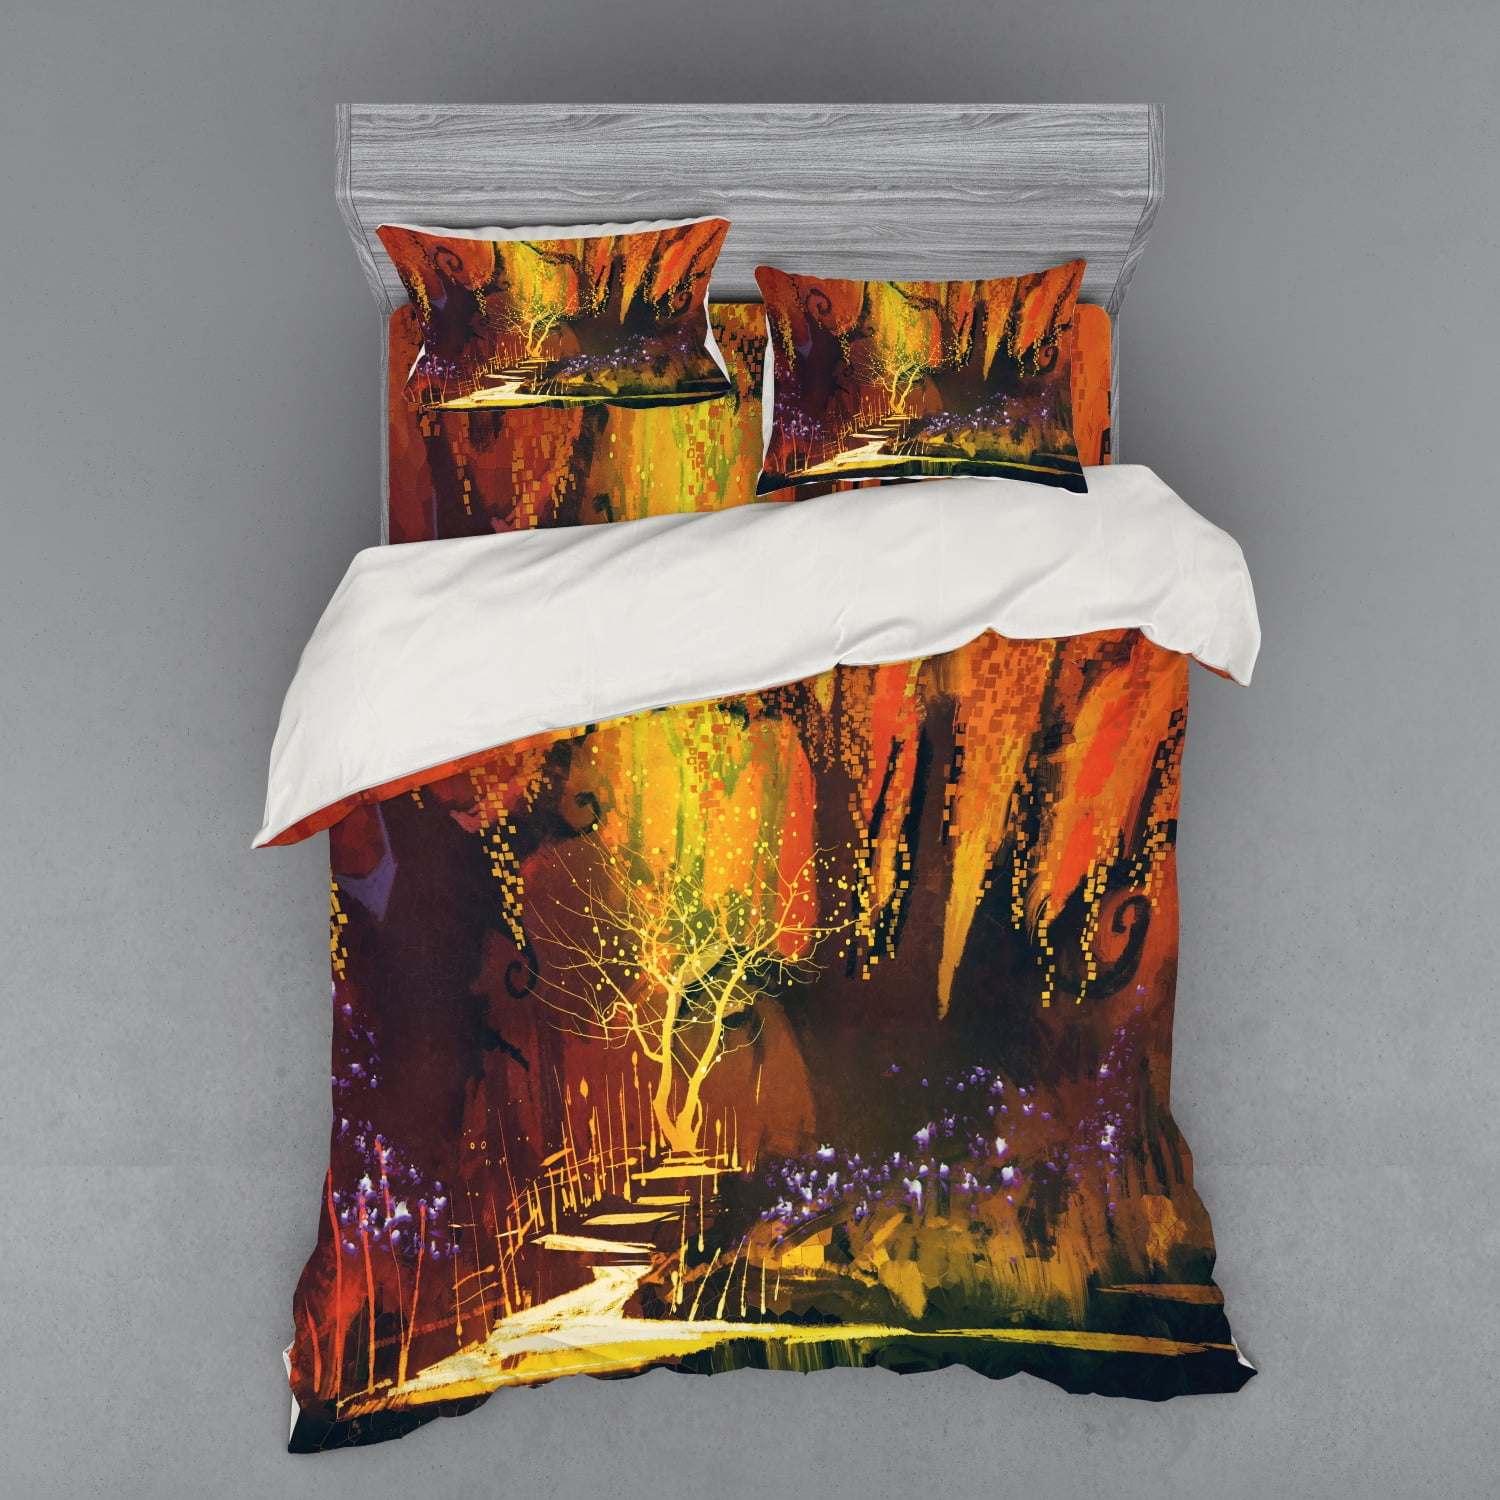 Fantasy Duvet Cover Set, Enchanted World Imaginary Forest with ...